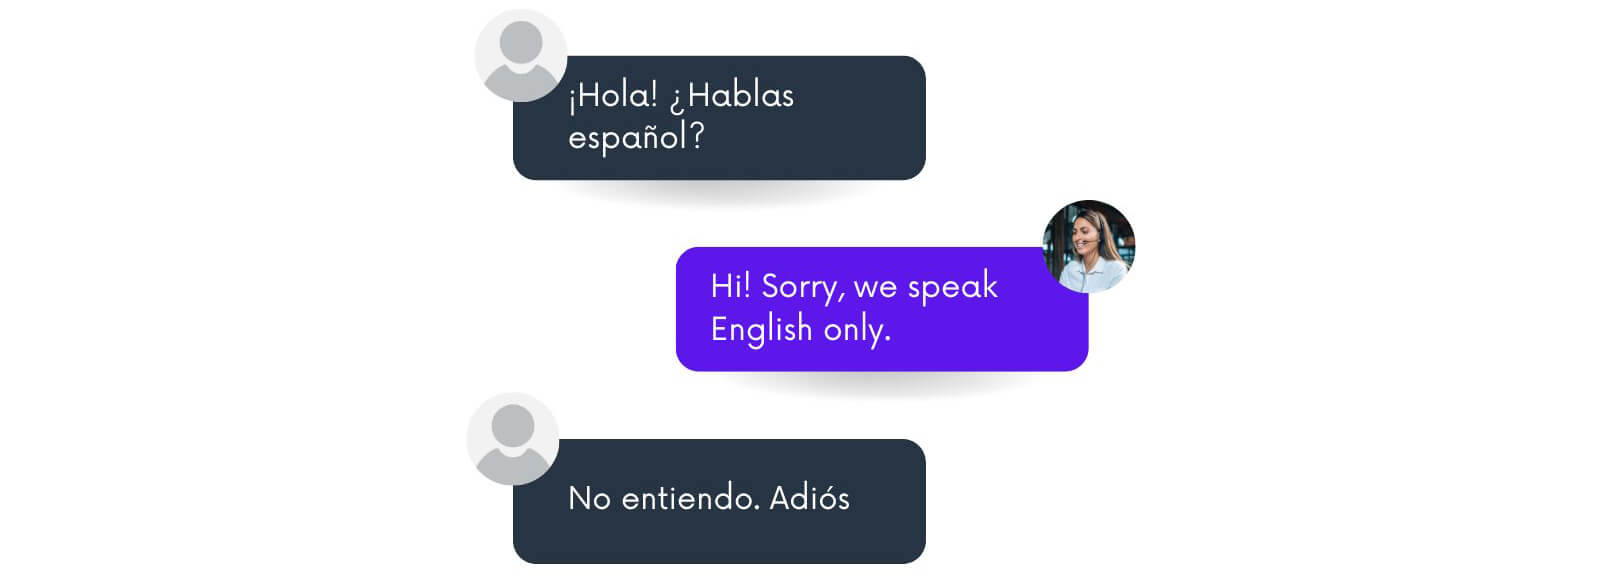 How to improve Customer Service with AI Chatbot Ribbo?